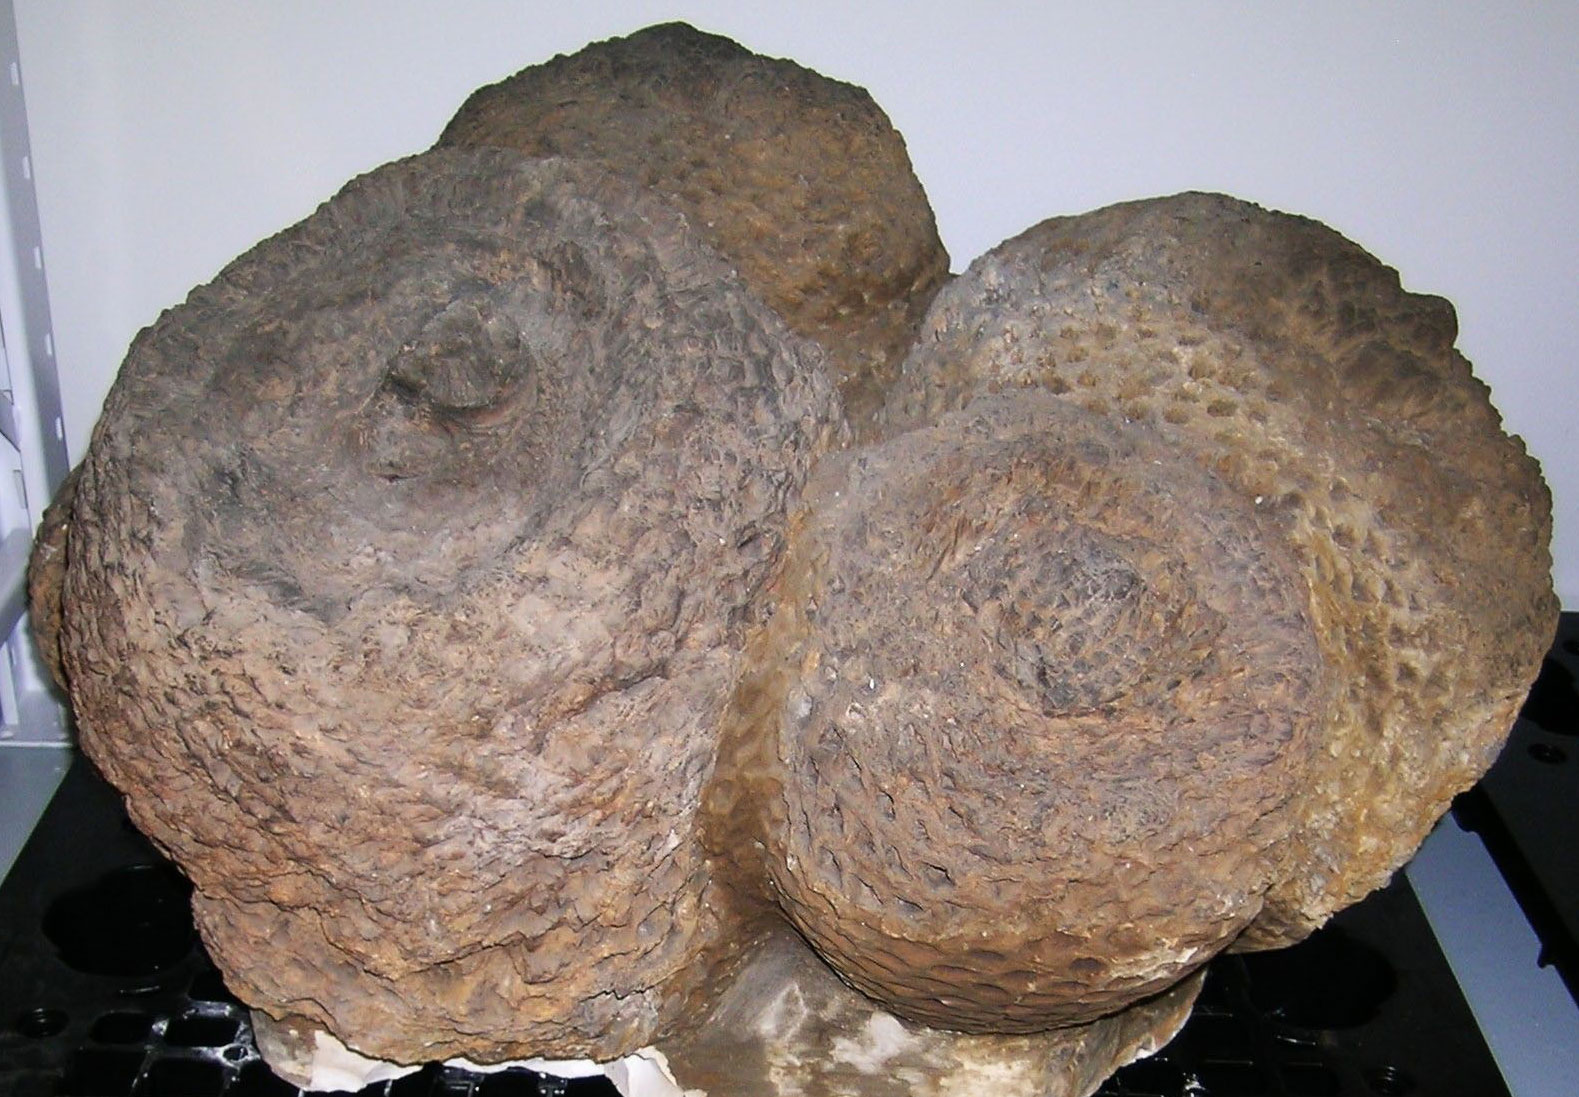 Photograph of a specimen of Cycadeoidea marshiana from the Early Cretaceous of South Dakota. The specimen is a cluster of four petrified trunks. The trunks are short, thick, and rounded at the top, with a depression at the apex with a central projection that could be the place where the leaves attached. Each trunk is covered with diamond-shaped leaf bases that are helically arranged.